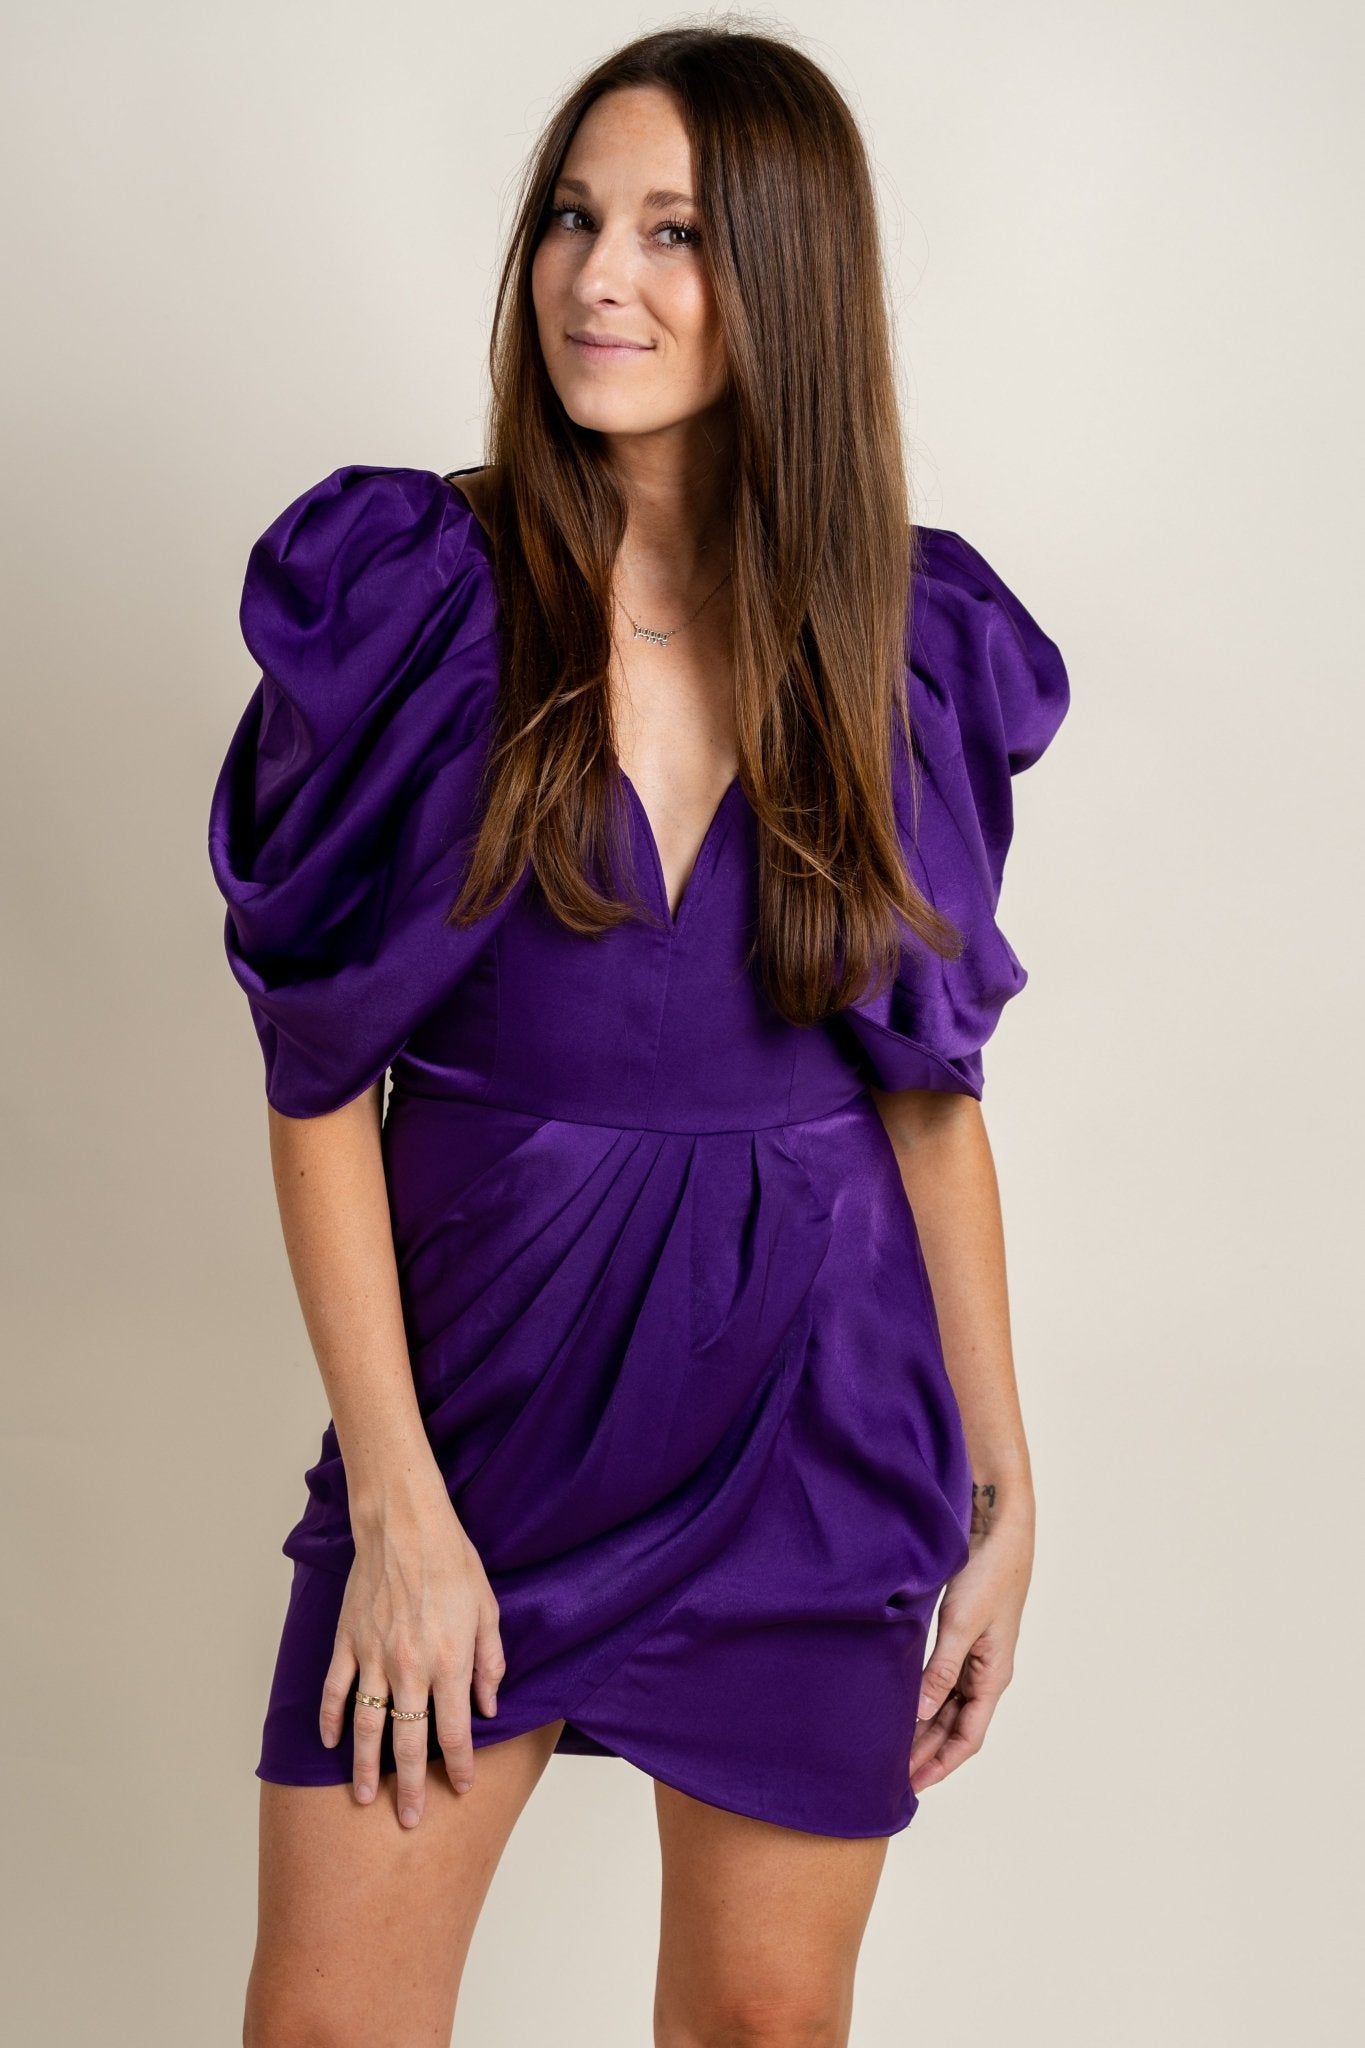 Draped sleeve satin dress purple - Affordable New Year's Eve Party Outfits at Lush Fashion Lounge Boutique in Oklahoma City